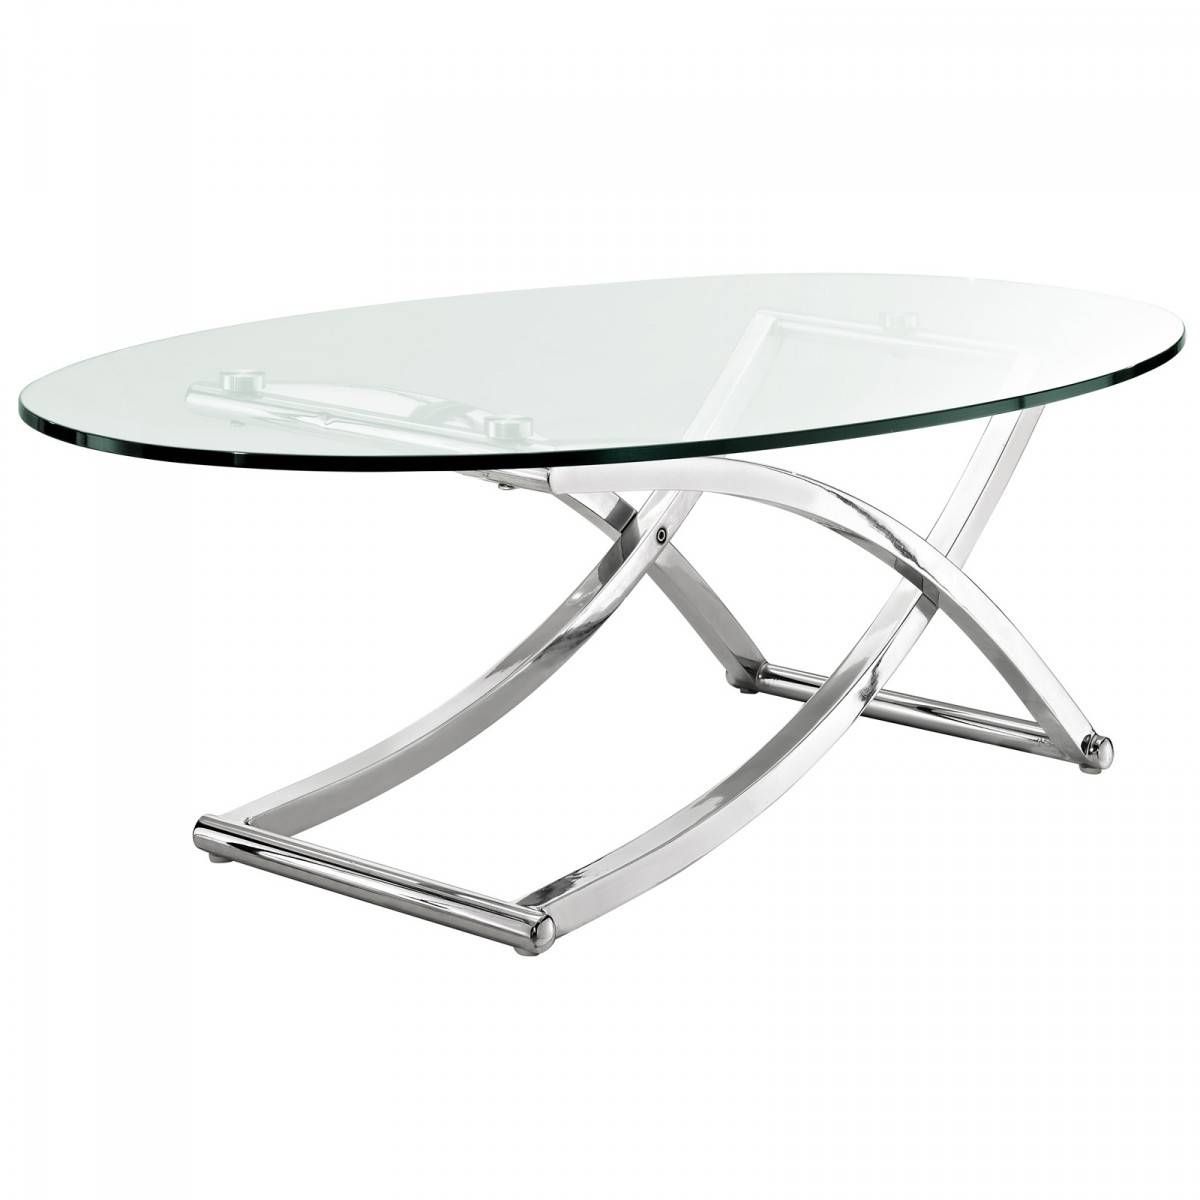 Glass Oval Coffee Table: A Unique Selection For Your Living Room For Modern Chrome Coffee Tables (View 14 of 30)